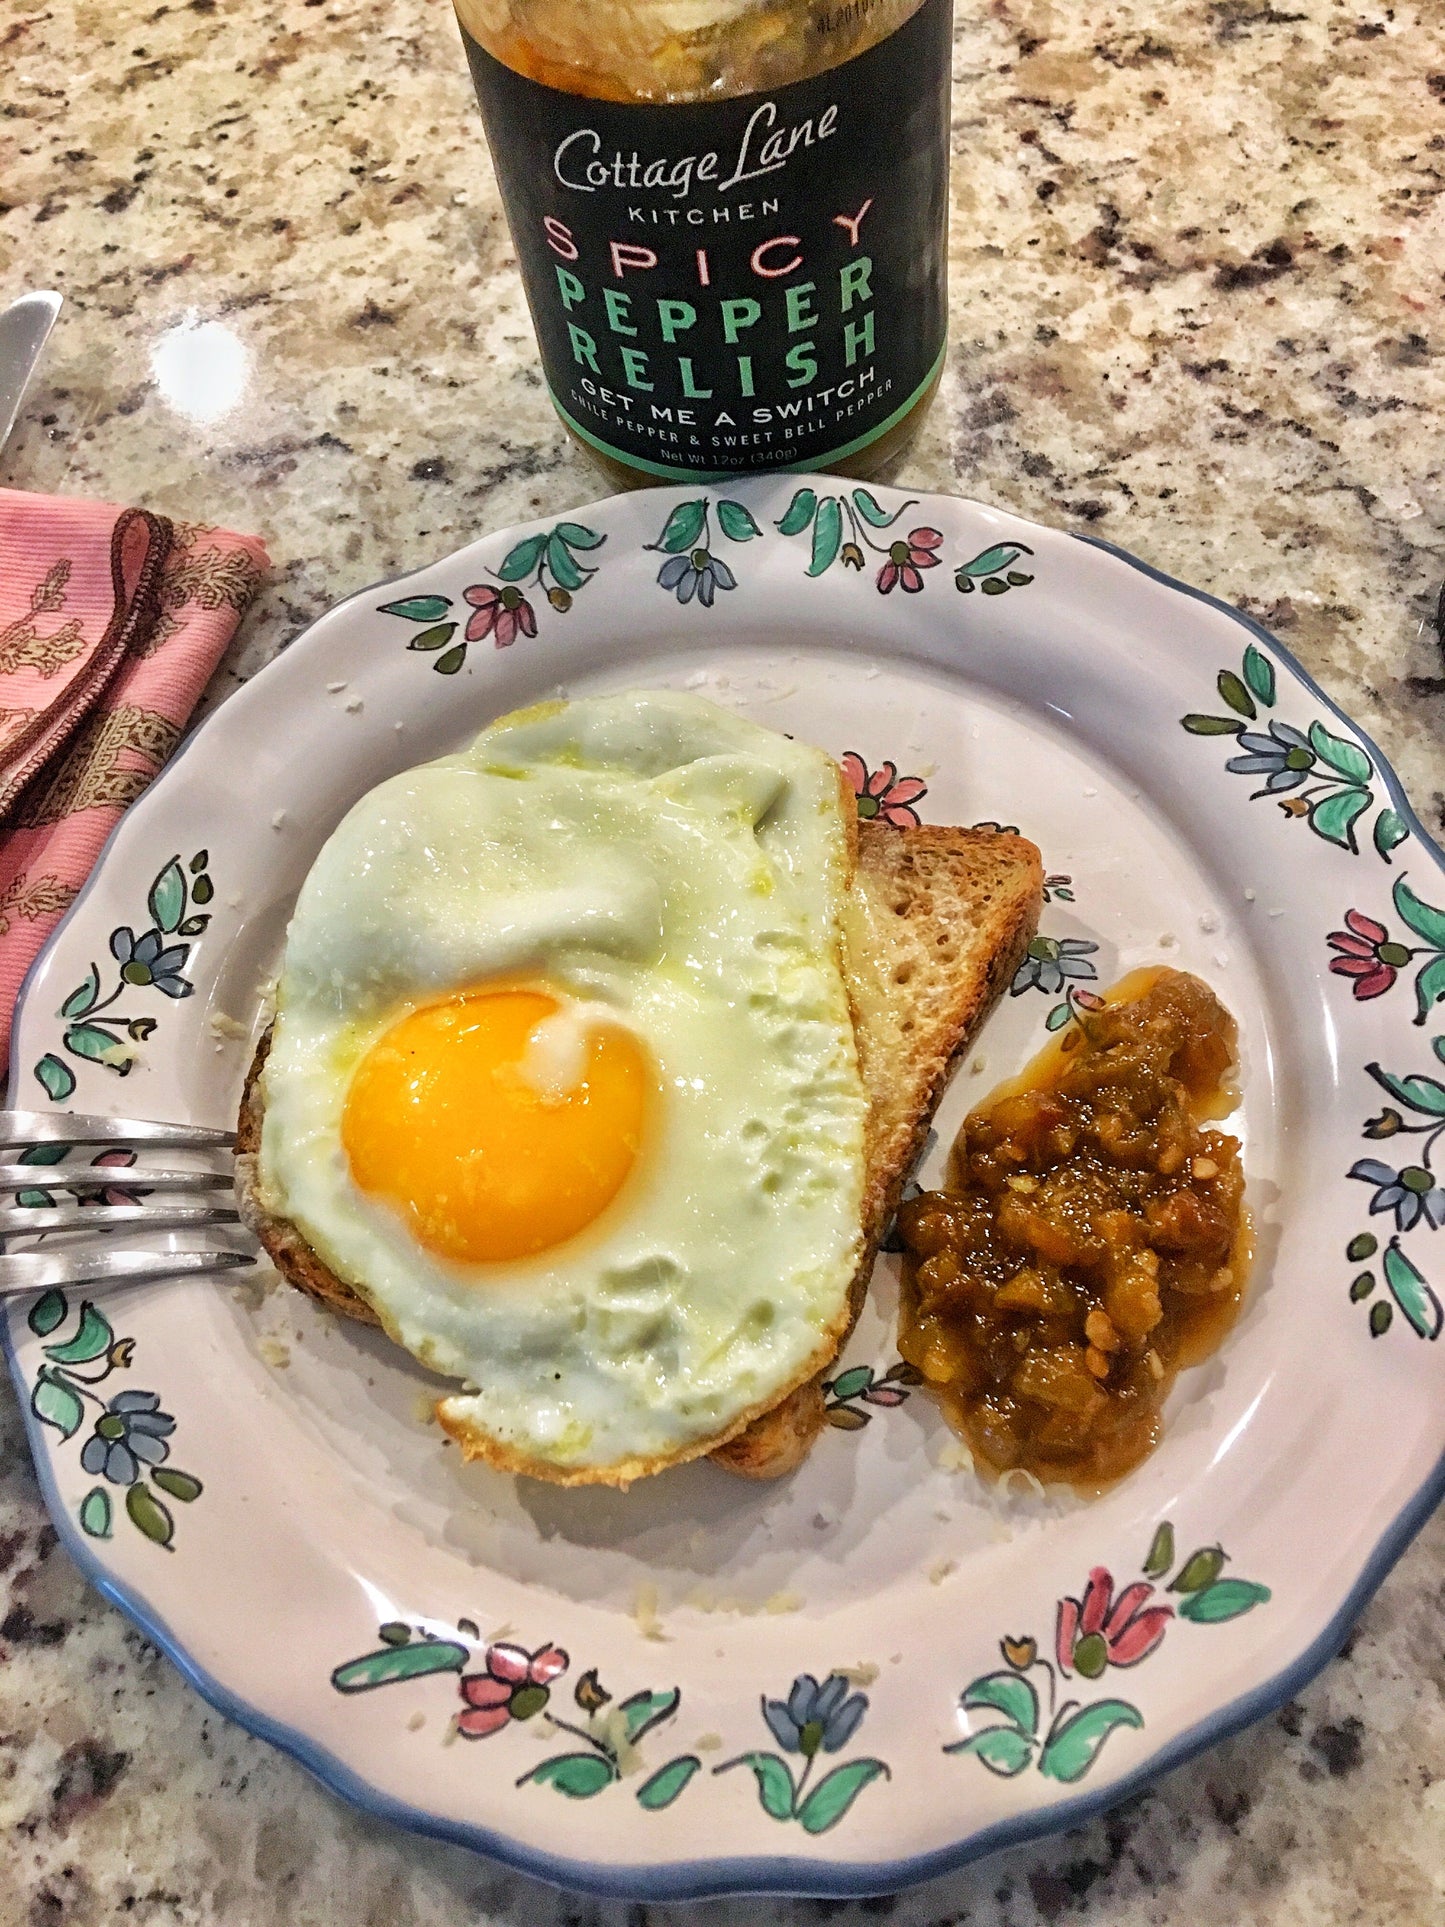 Fried Egg on Toast with Get Me A Switch Spicy Pepper Relish by Cottage Lane Kitchen